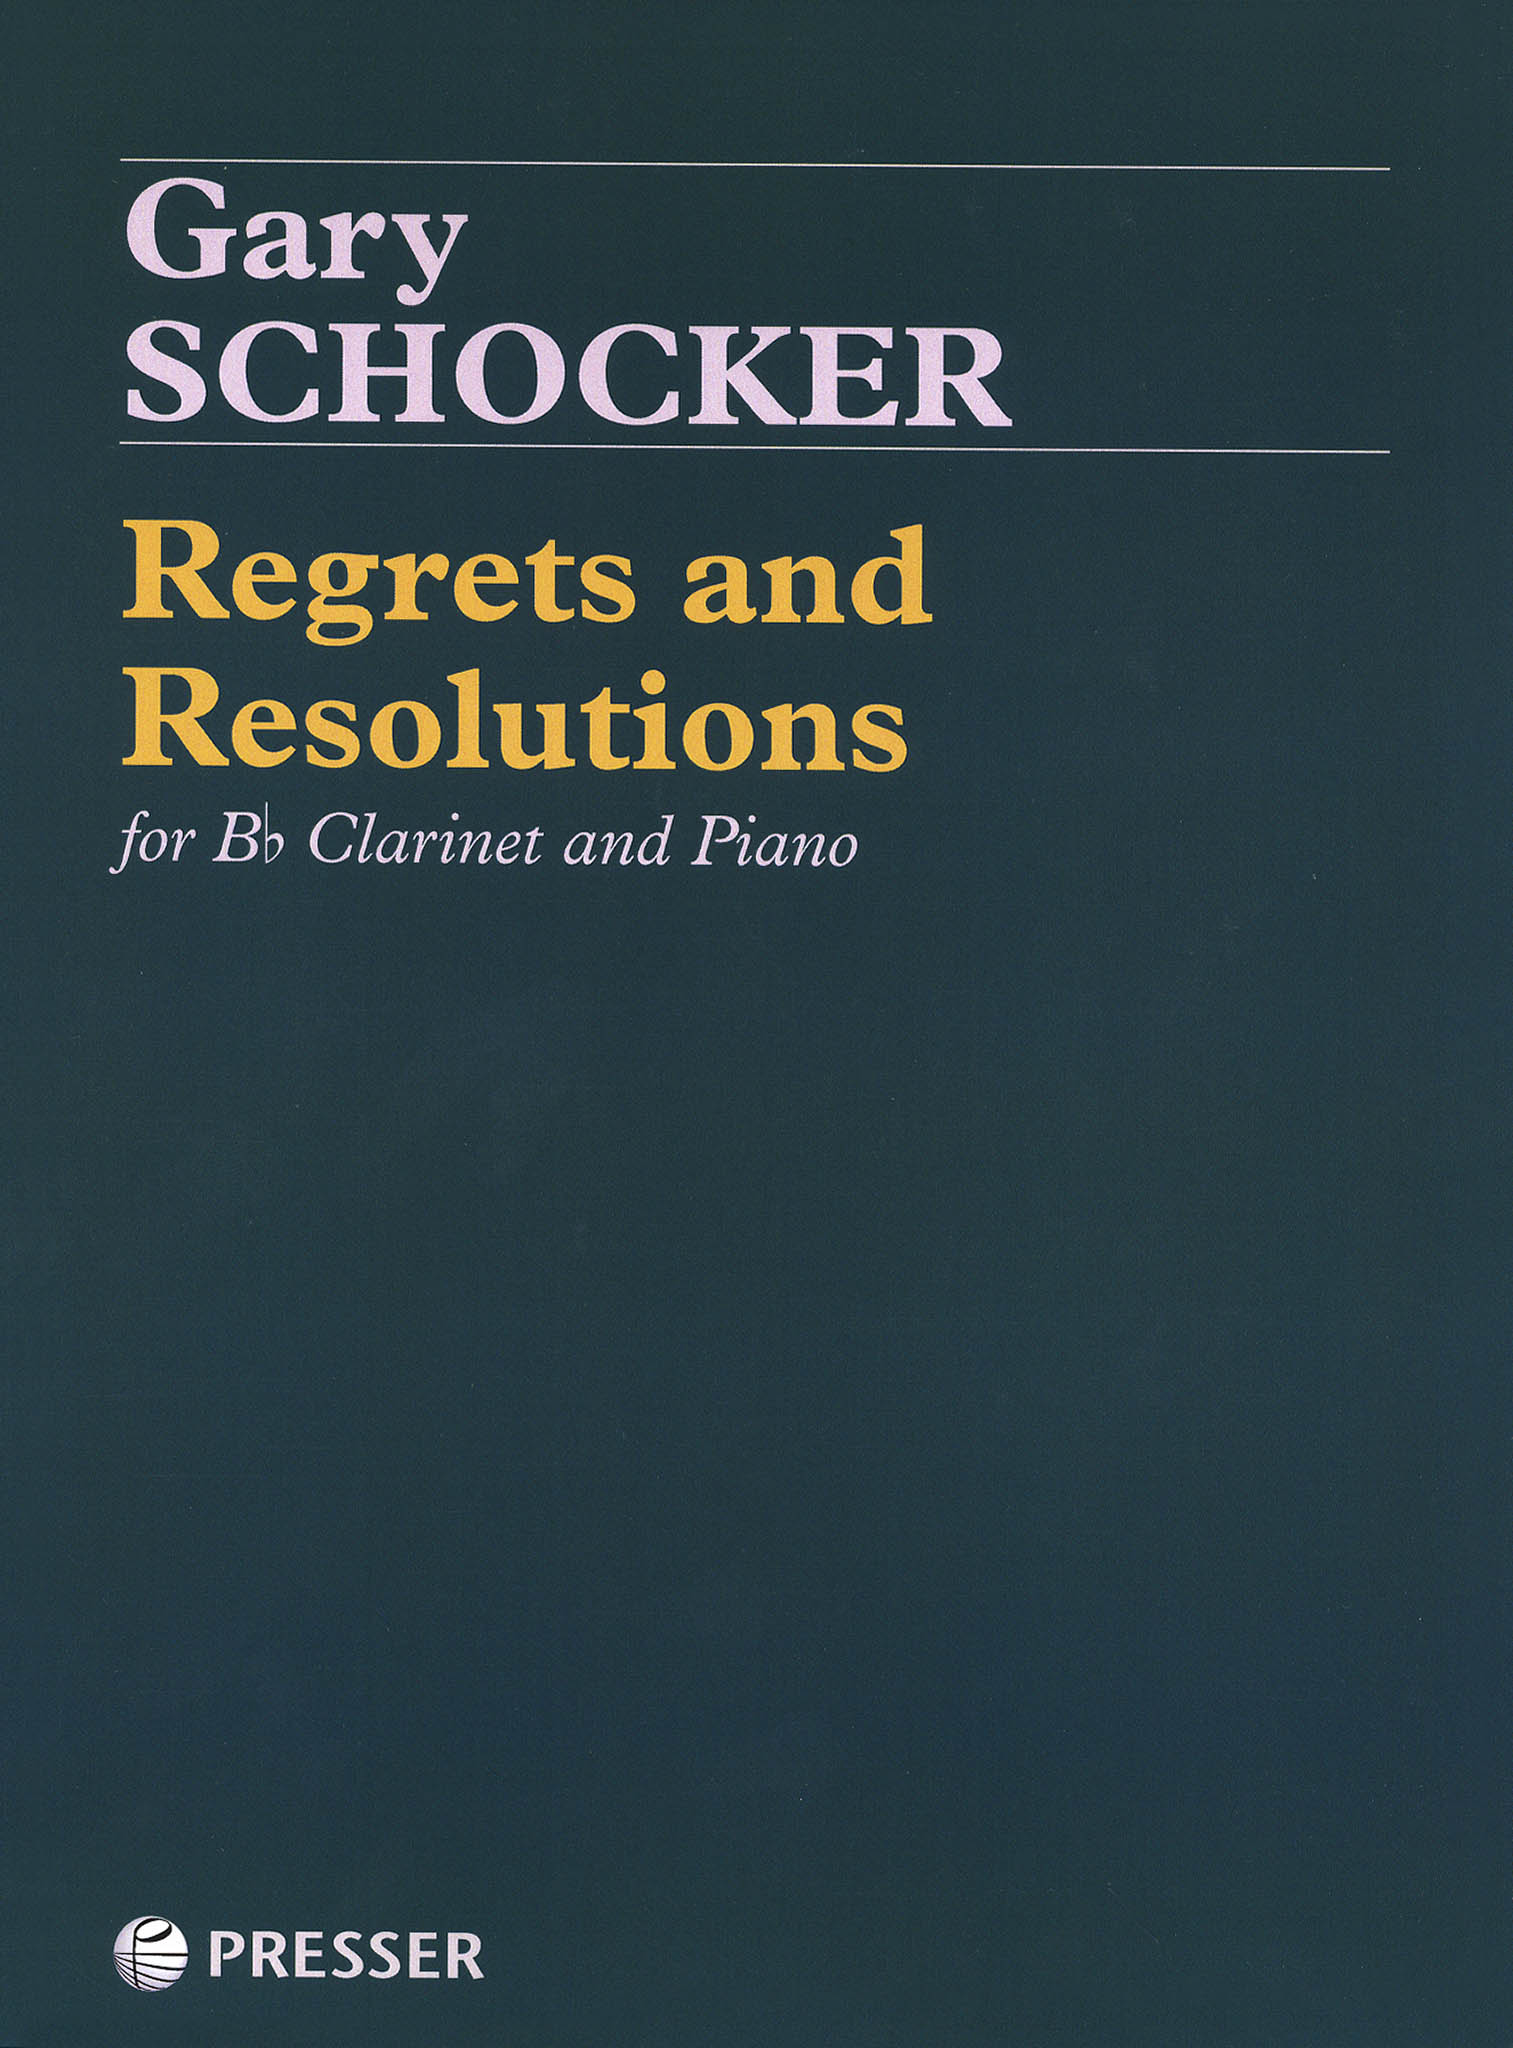 Schocker Regrets and Resolutions clarinet & piano Cover